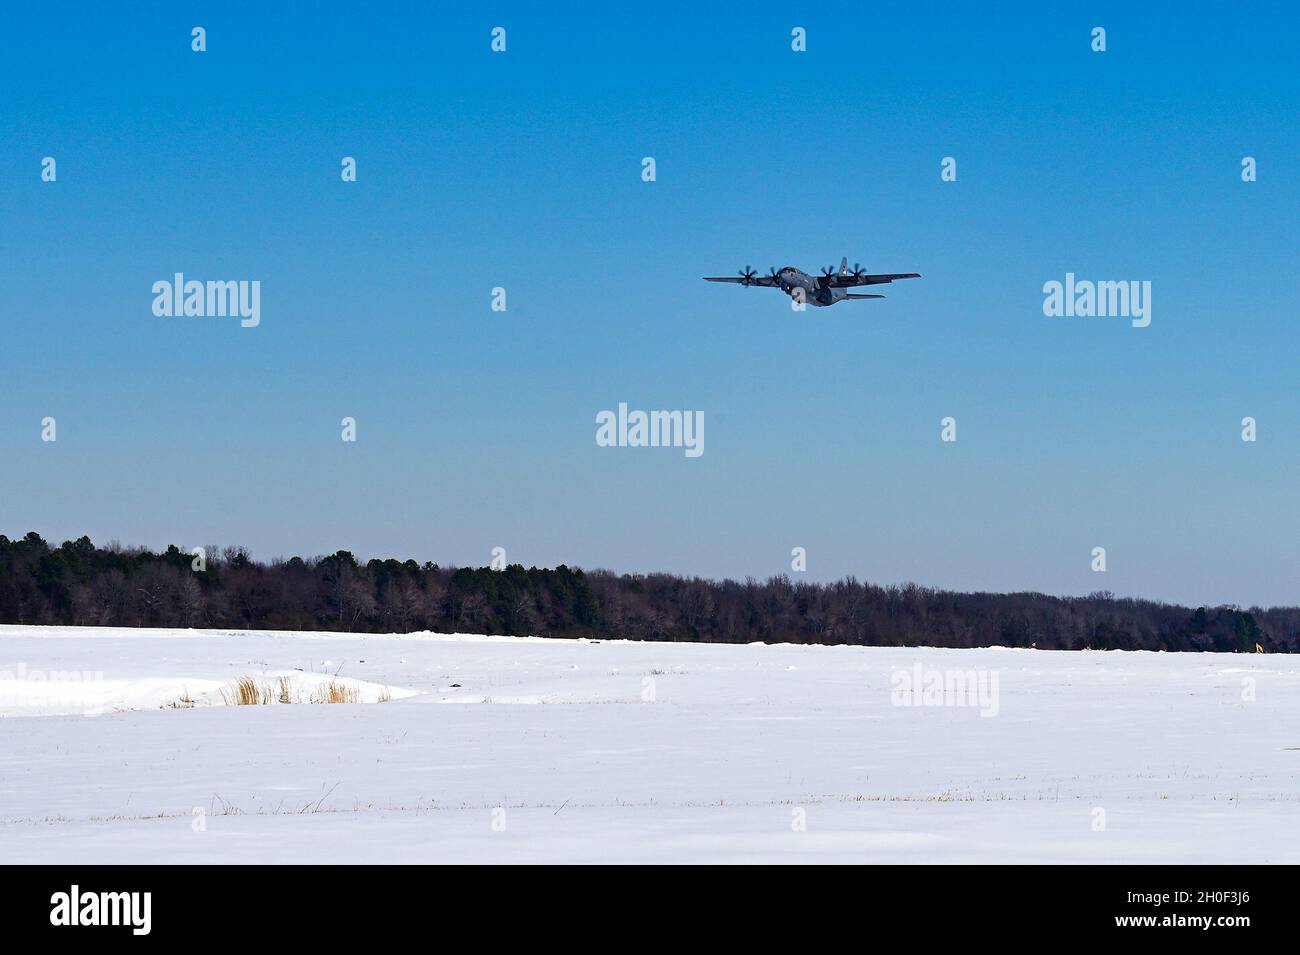 A C 130j Super Hercules Assigned To The 314th Airlift Wing Takes Off From Little Rock Air Force Base Arkansas Feb 21 The Little Rock Area Received Record Breaking Snowfall From A Weeklong Winter